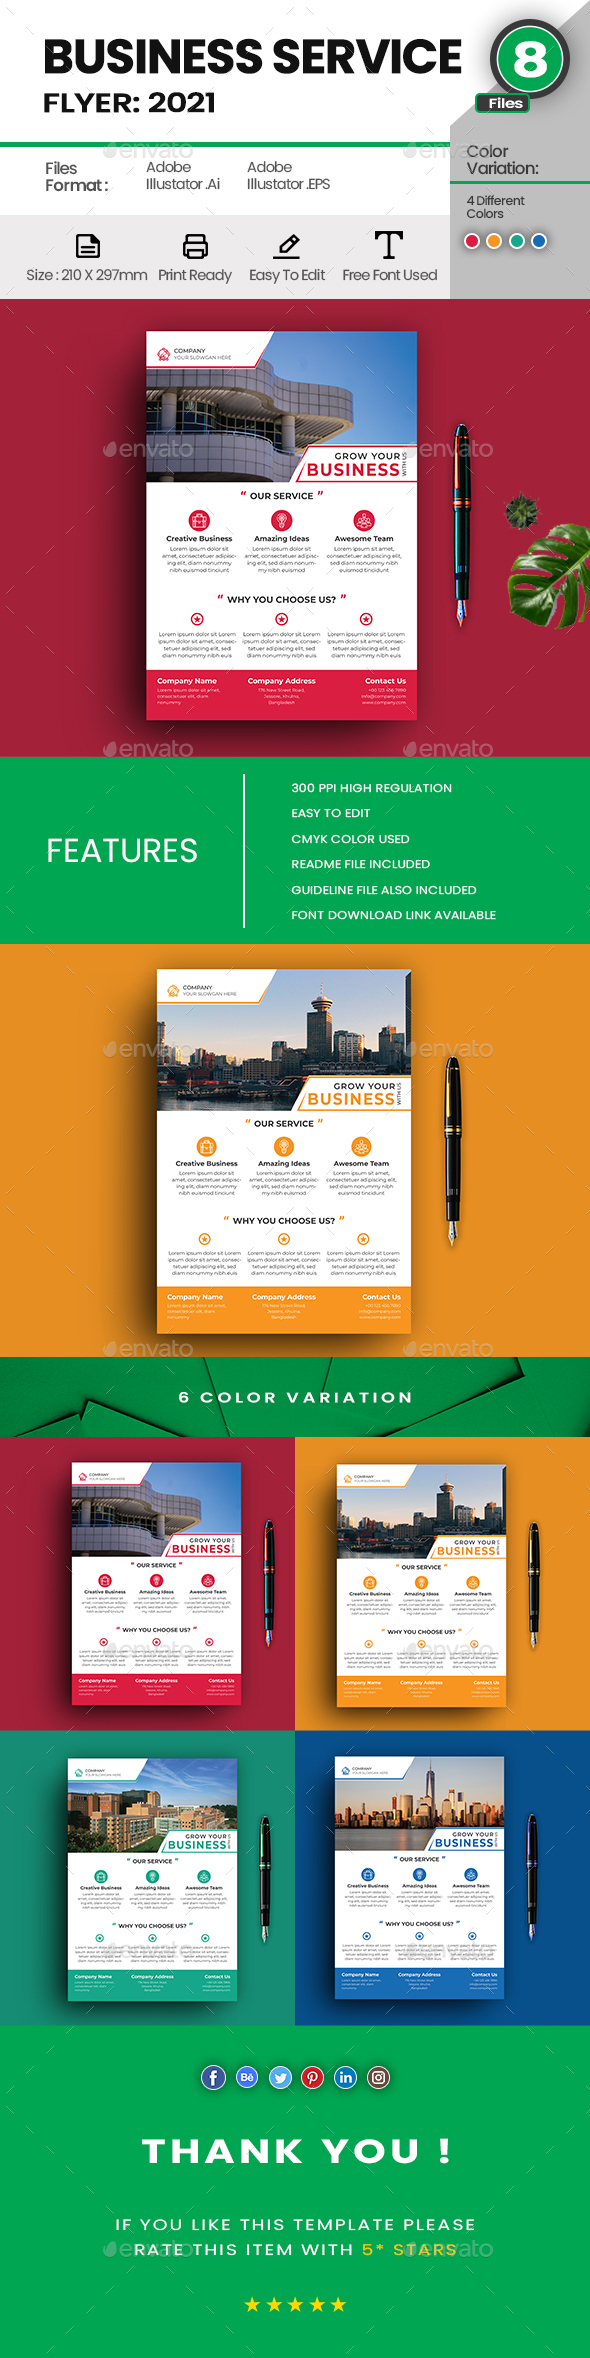 Corporate Business Services Flyer